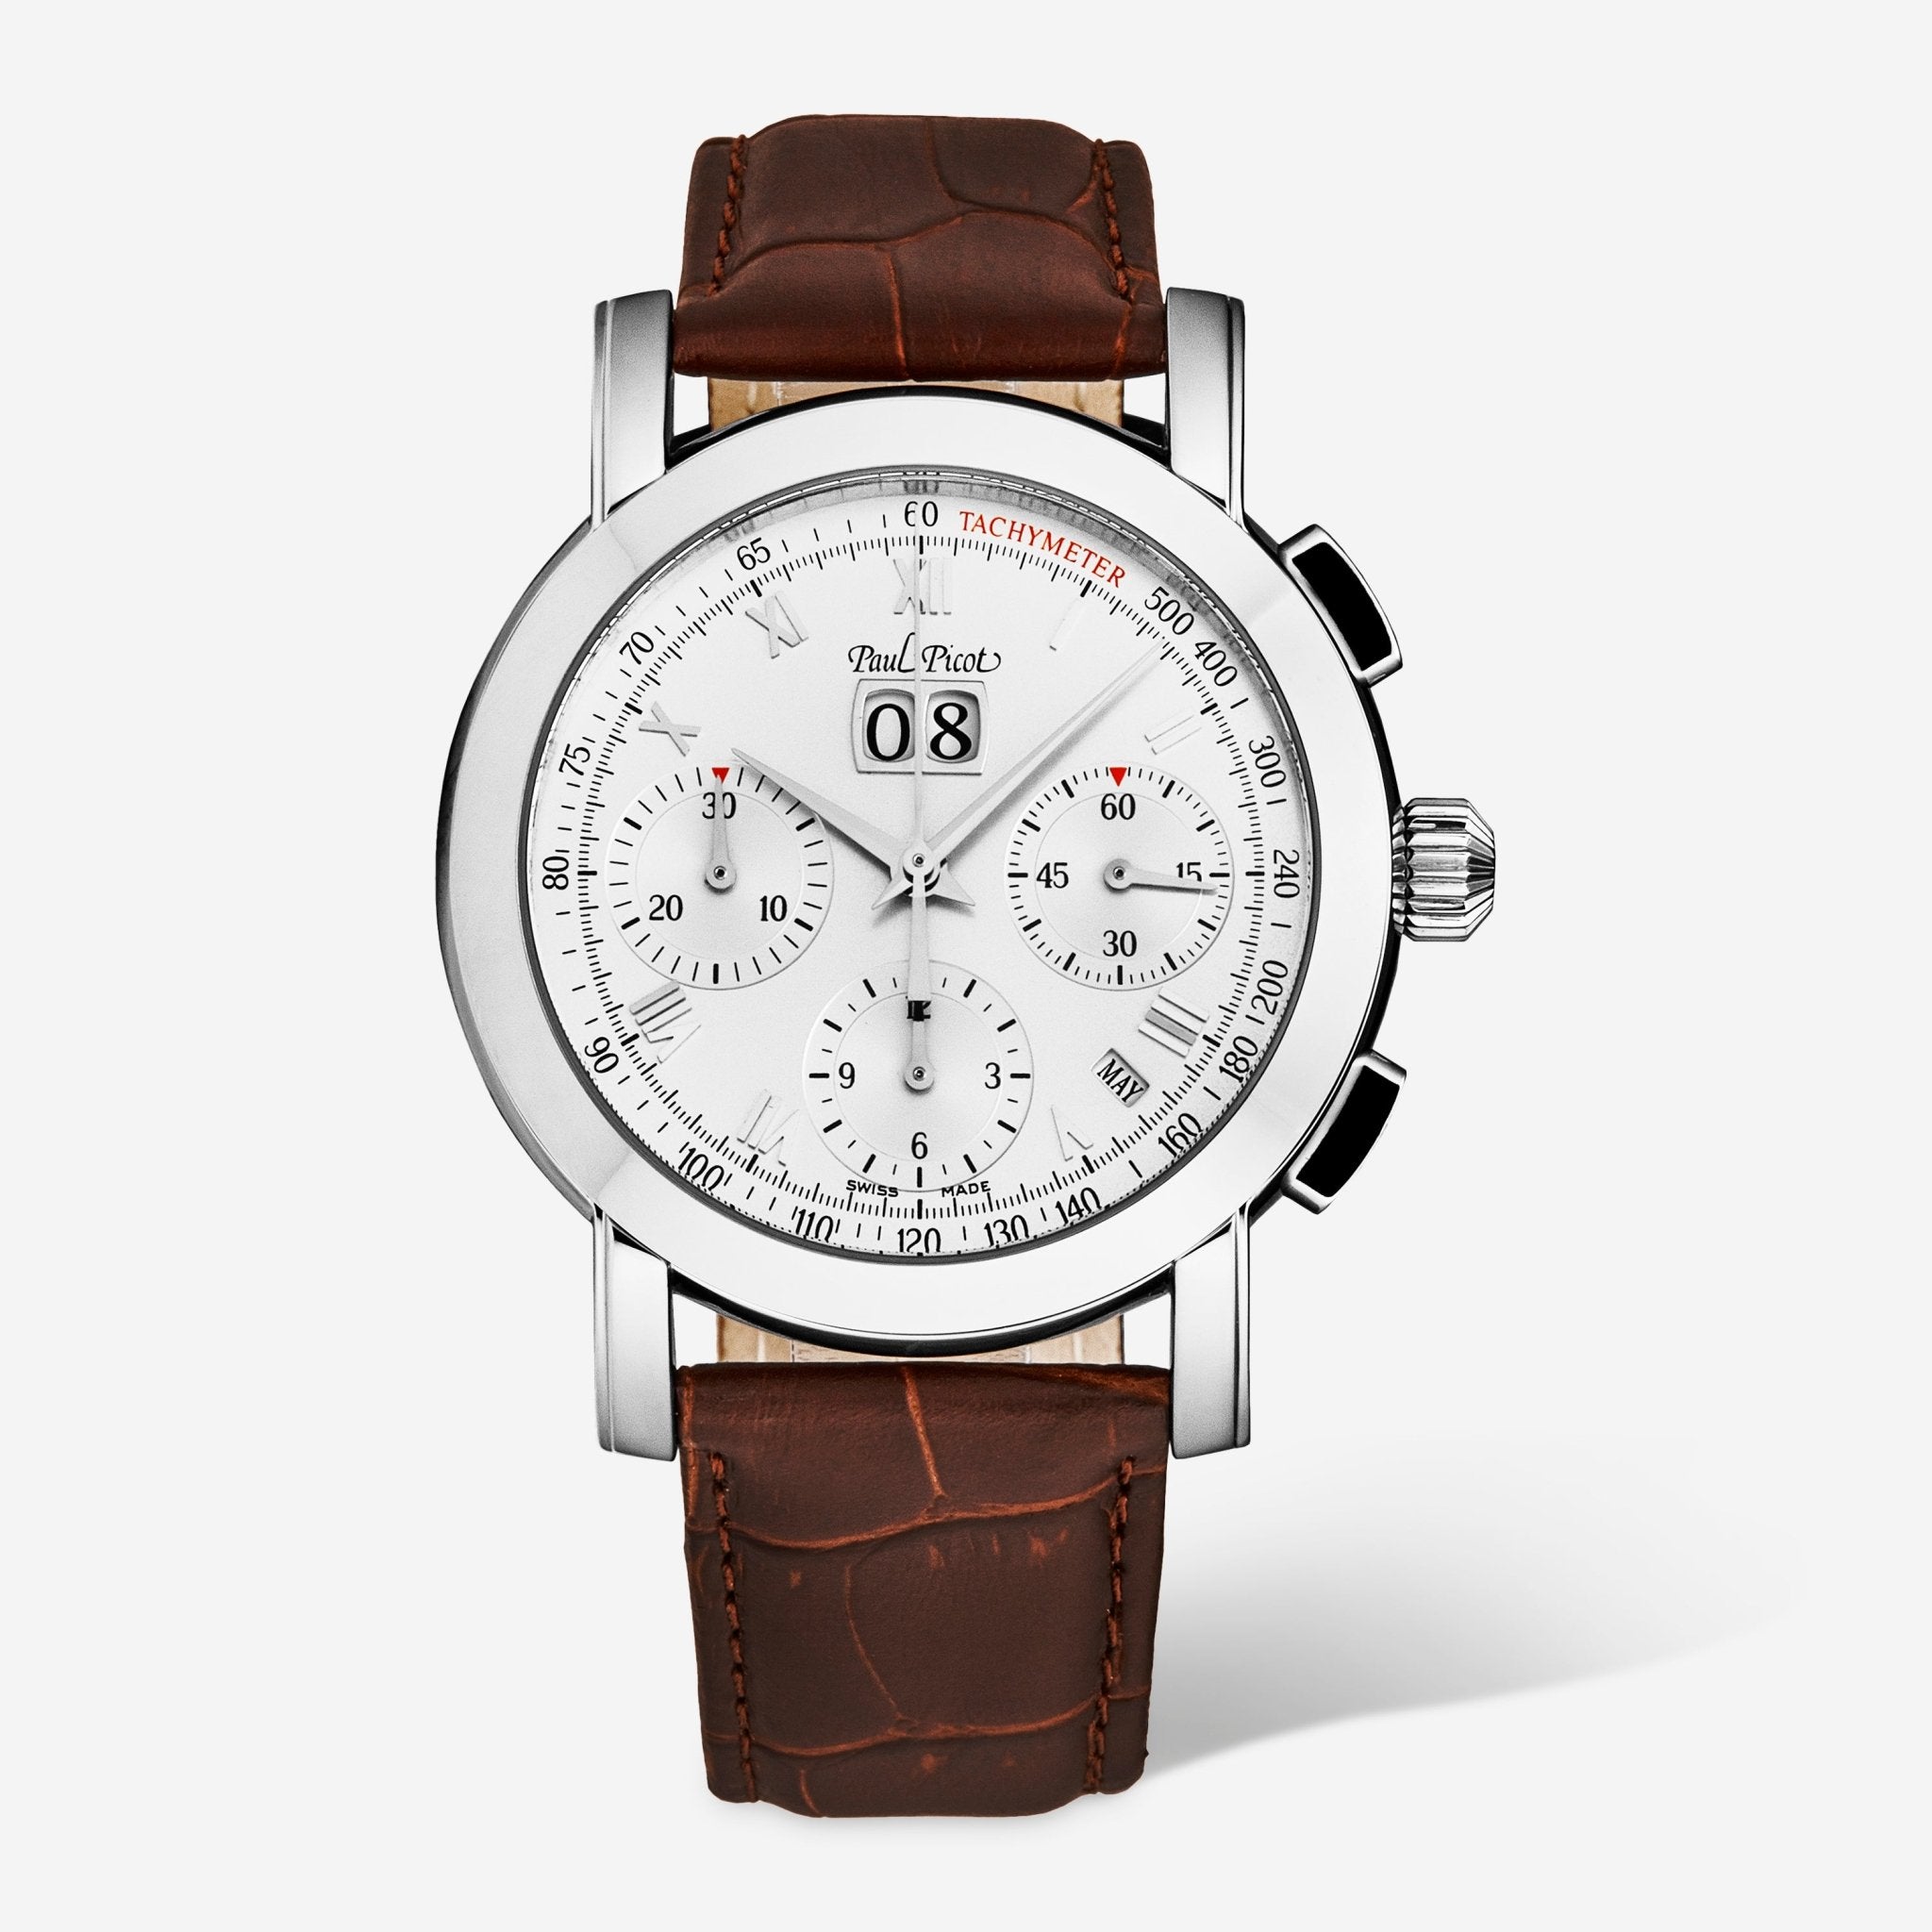 Paul Picot Firshire Chronograph Silver Dial Men's Automatic Watch P7045.20.731 - THE SOLIST - Paul Picot